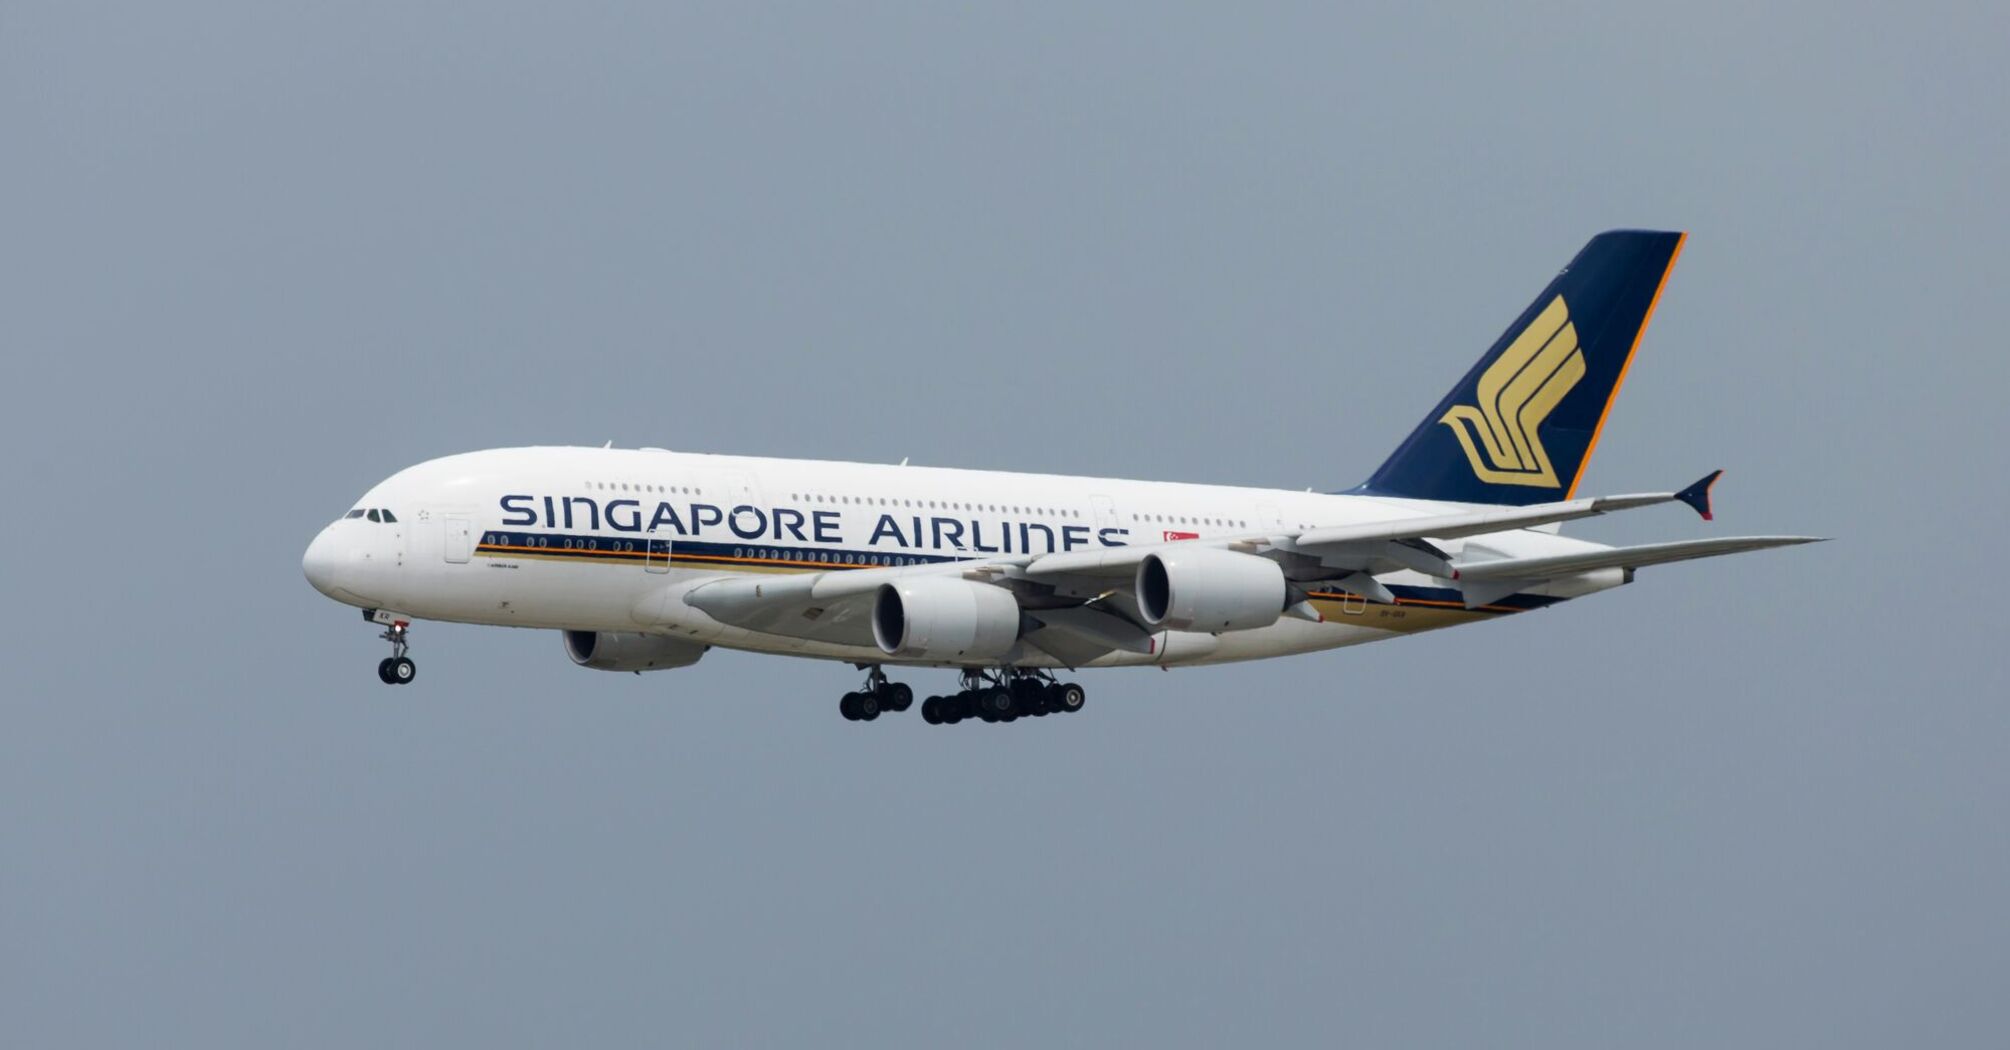 Singapore airliner in the flight